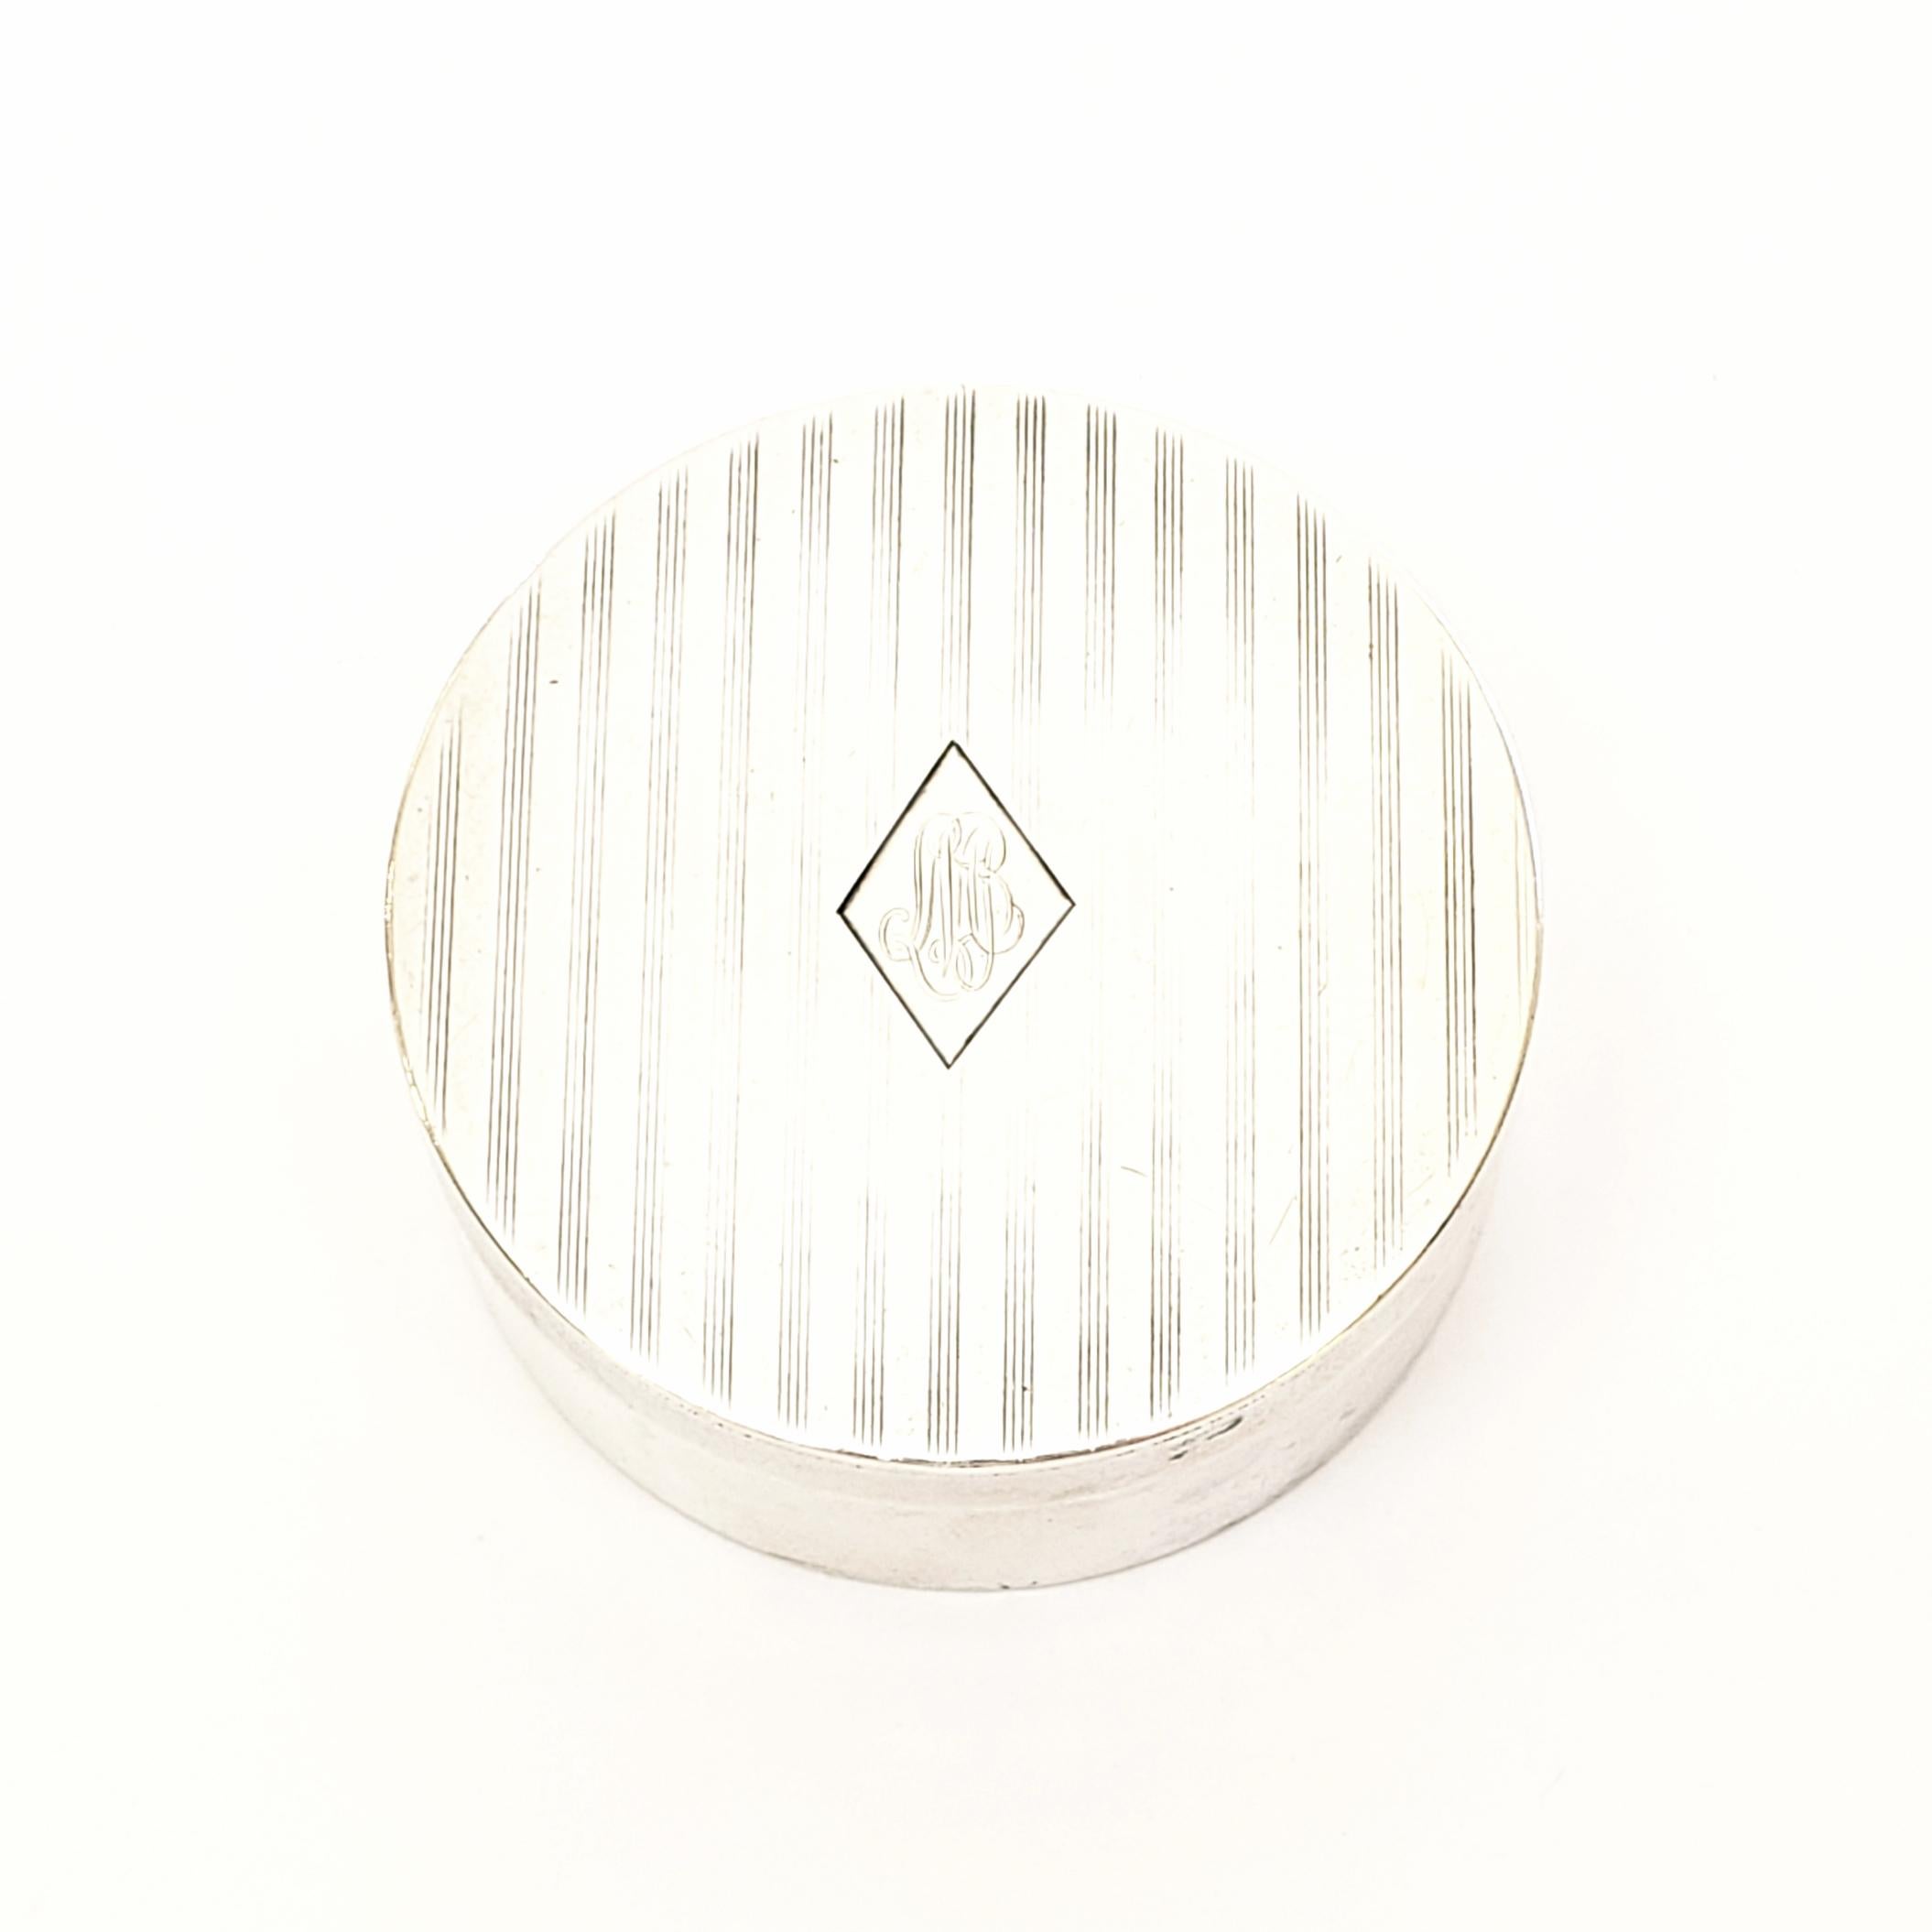 Antique sterling silver pill box by William B Kerr of Newark, NJ.

Beautiful small round box featuring etched lines and a monogram inside a diamond.

Monogram appears to be SMB.

Box measures approximate 1 13/16